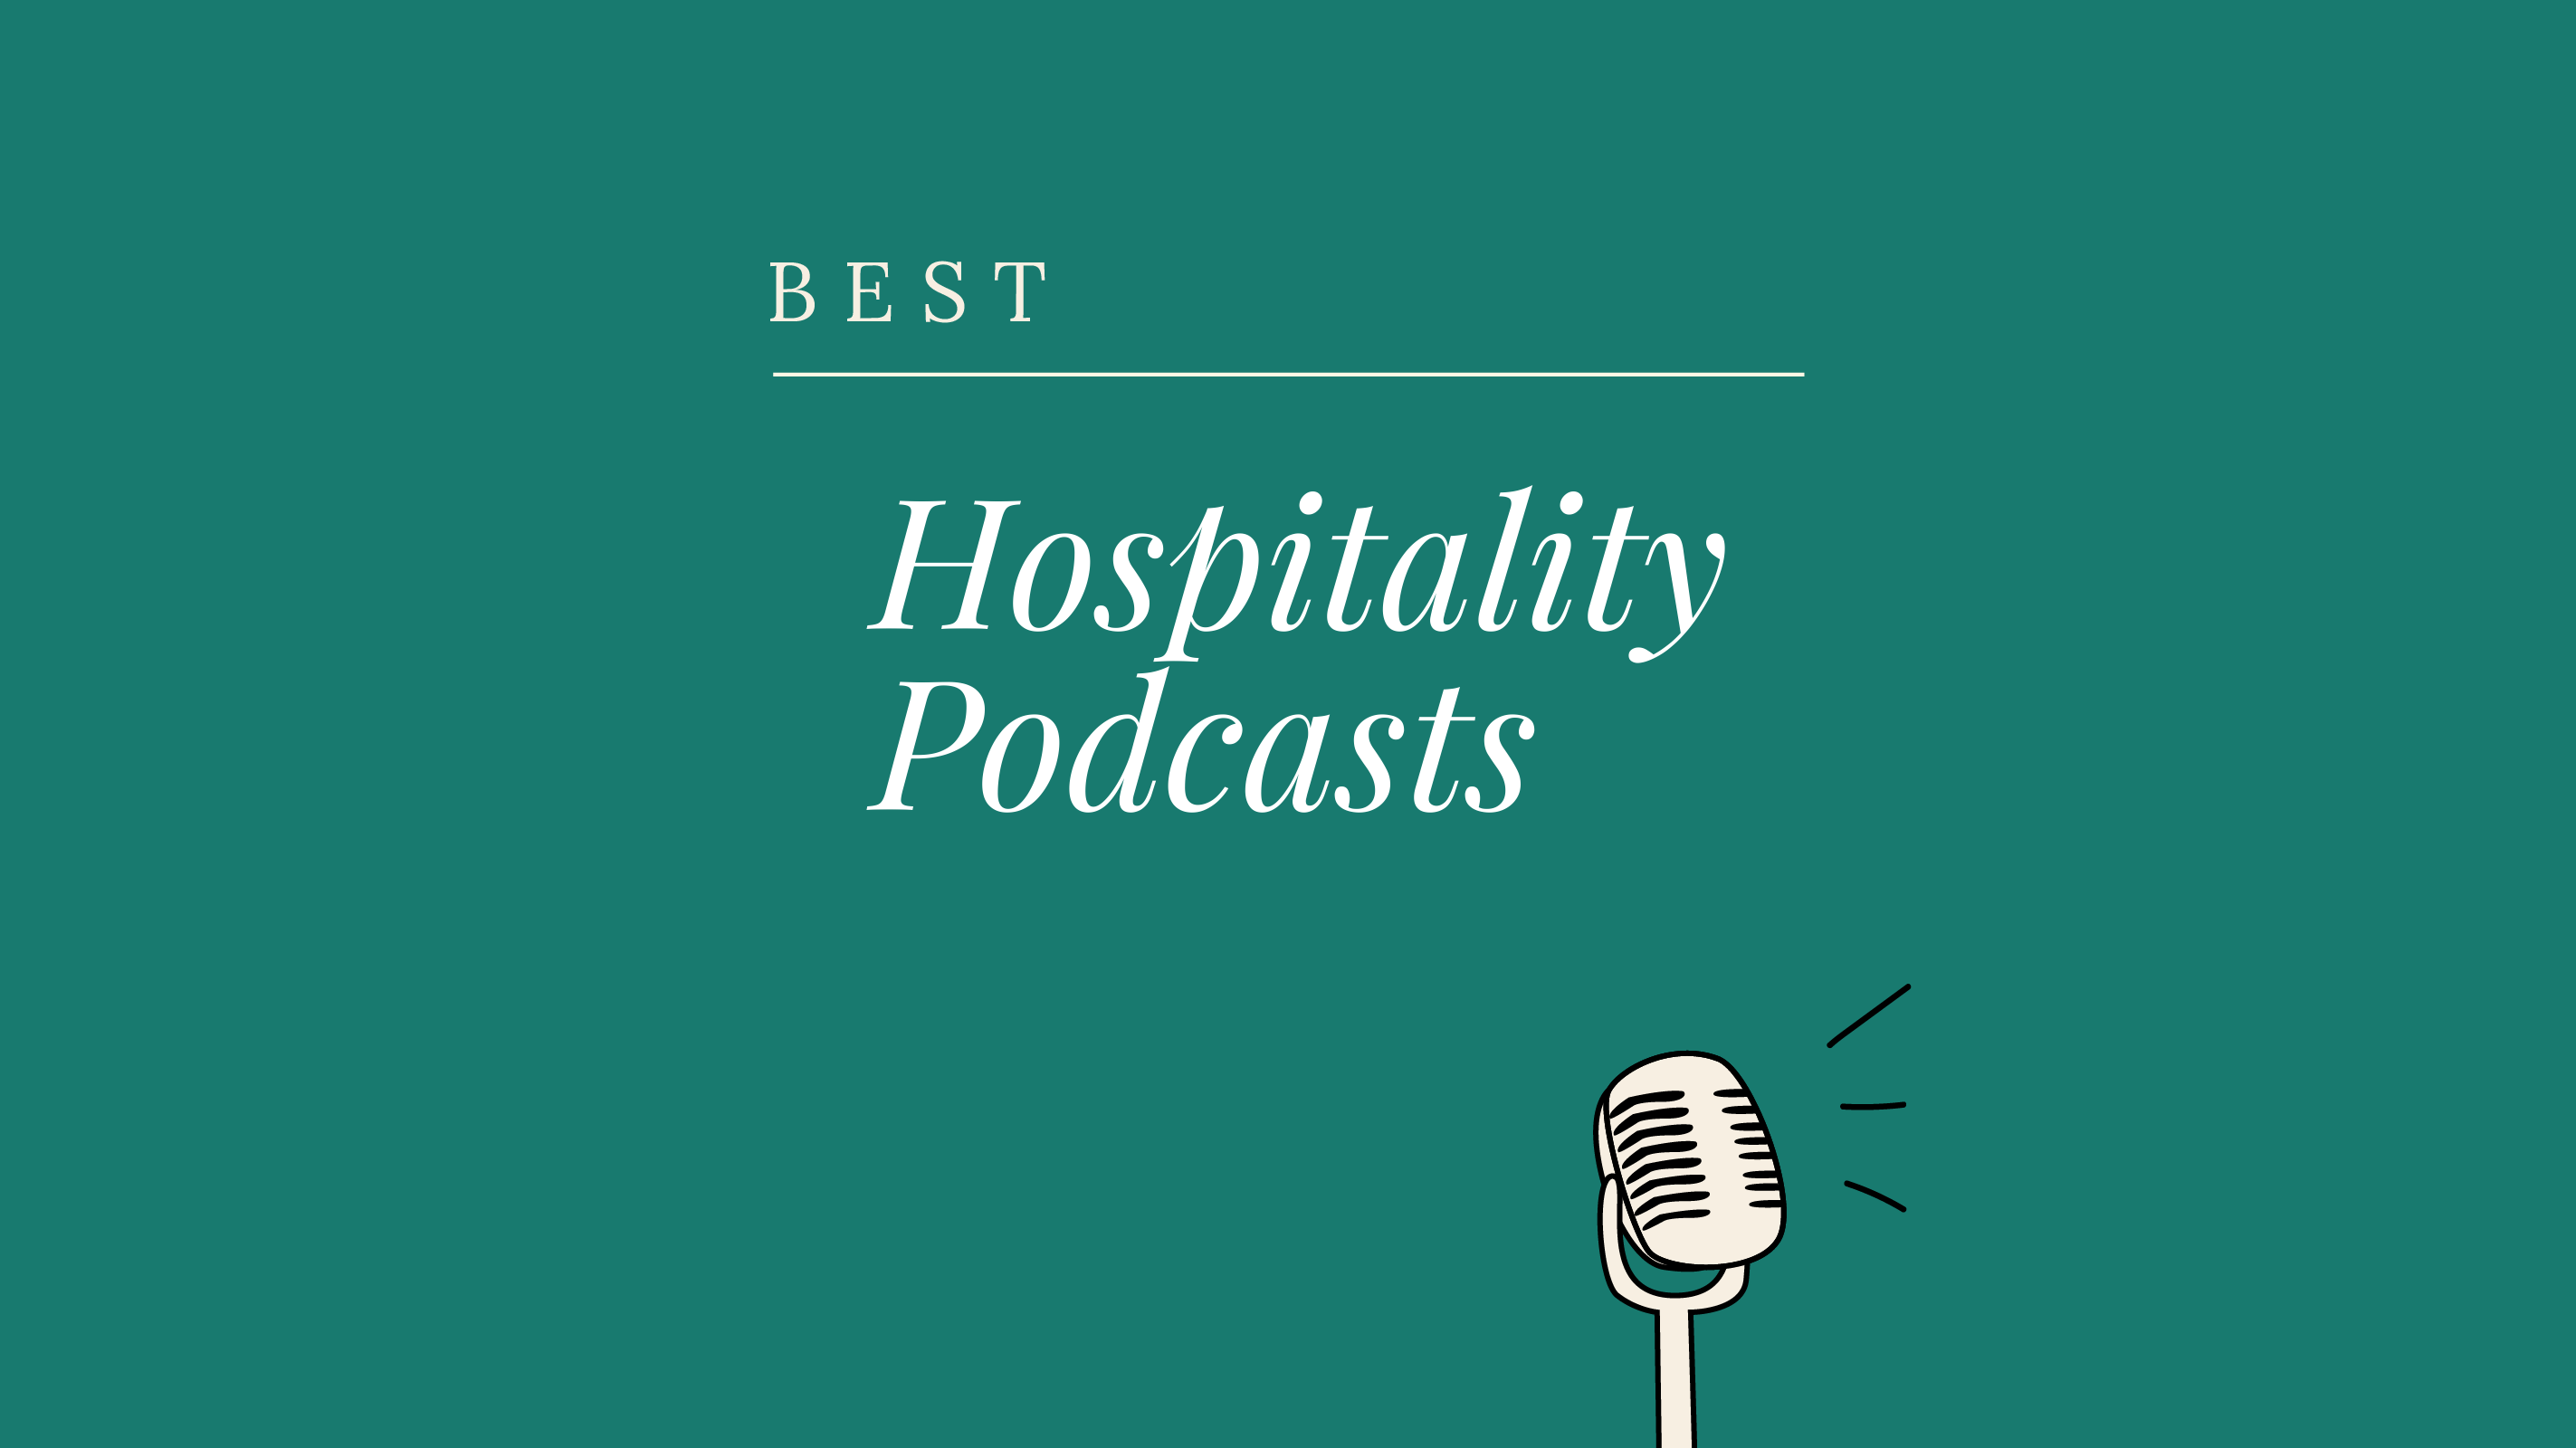 HOT-hospitality-podcasts-featured-image-1829